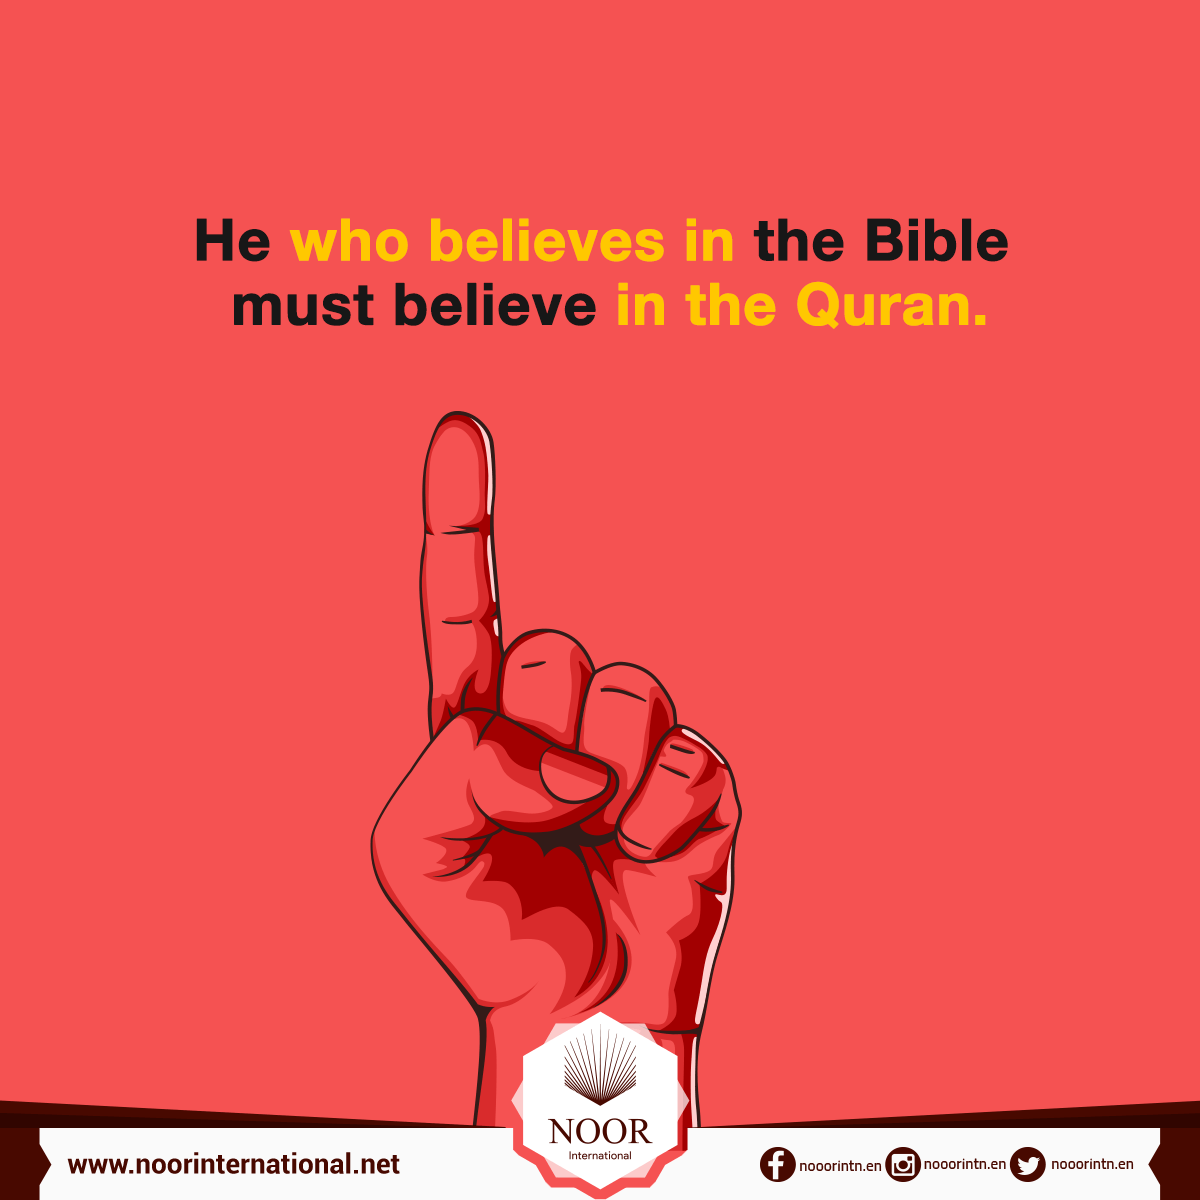 He who believes in the Bible must believe in the Quran